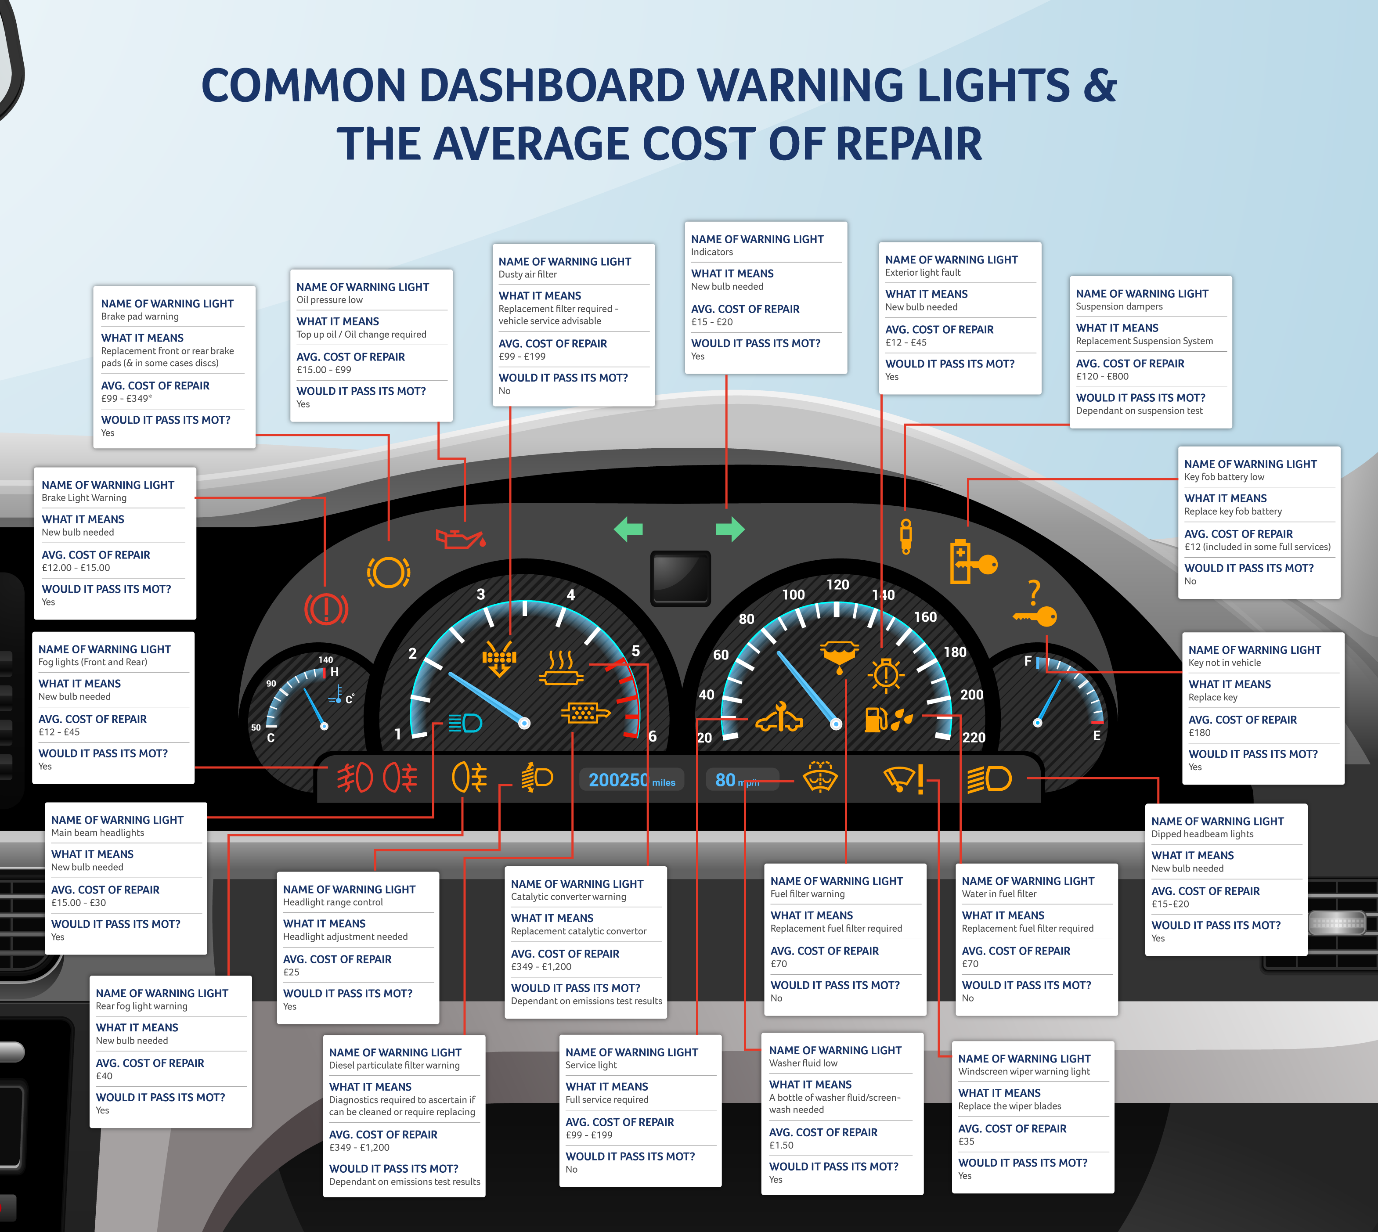 How well do know your dashboard warning lights?